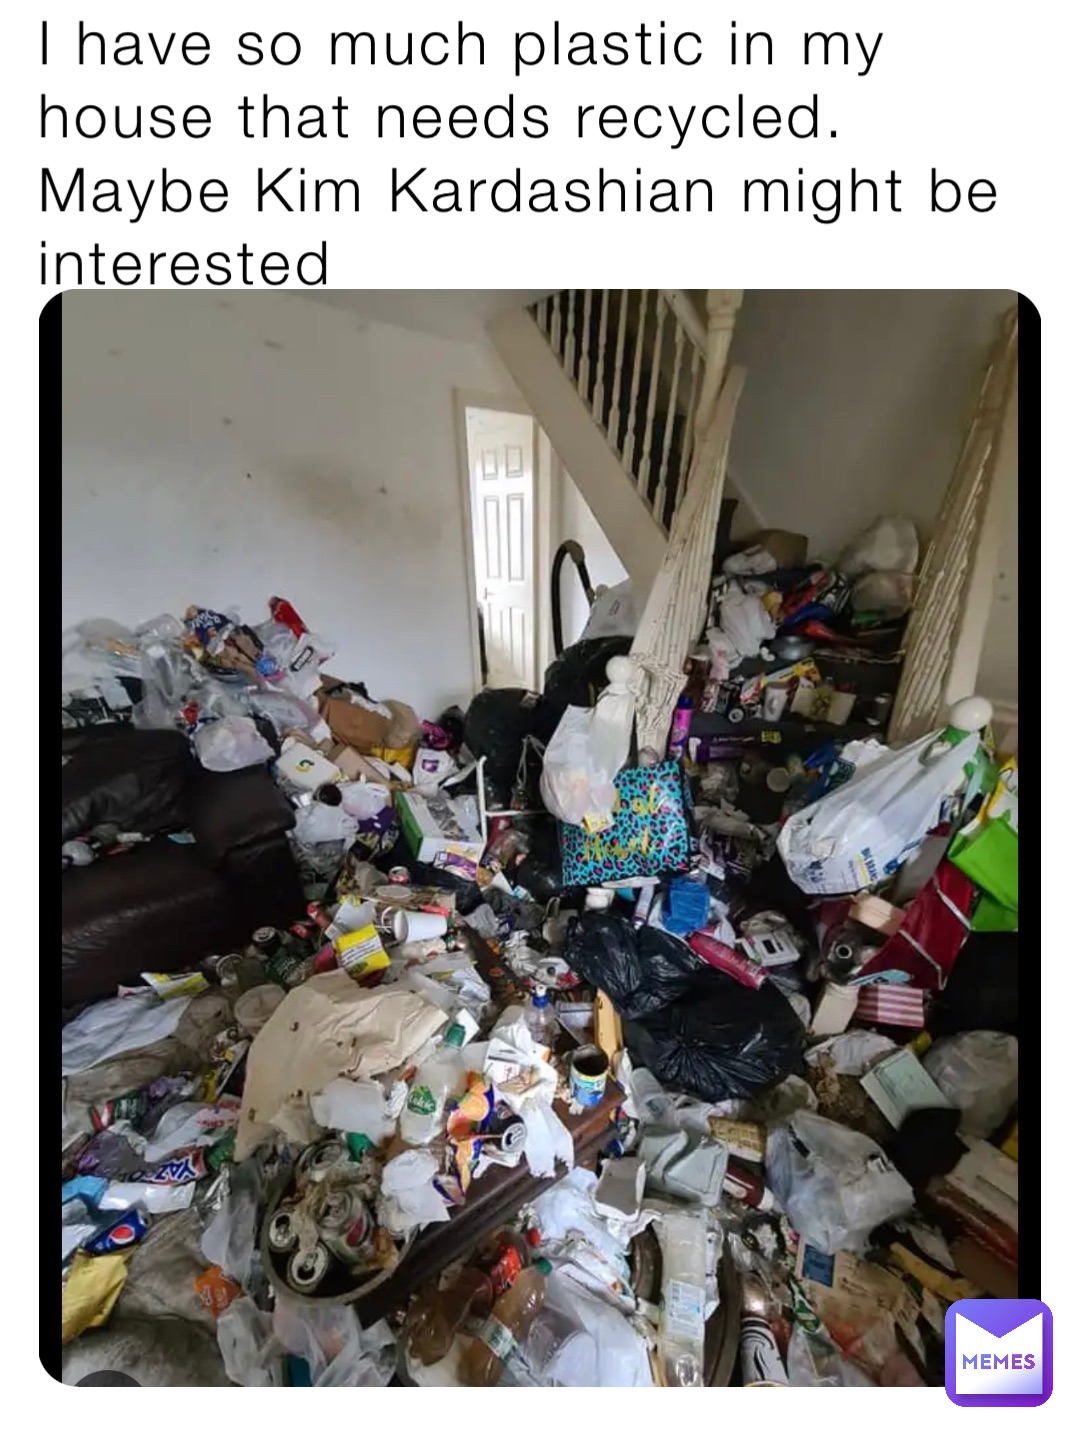 I have so much plastic in my house that needs recycled. Maybe Kim Kardashian might be interested